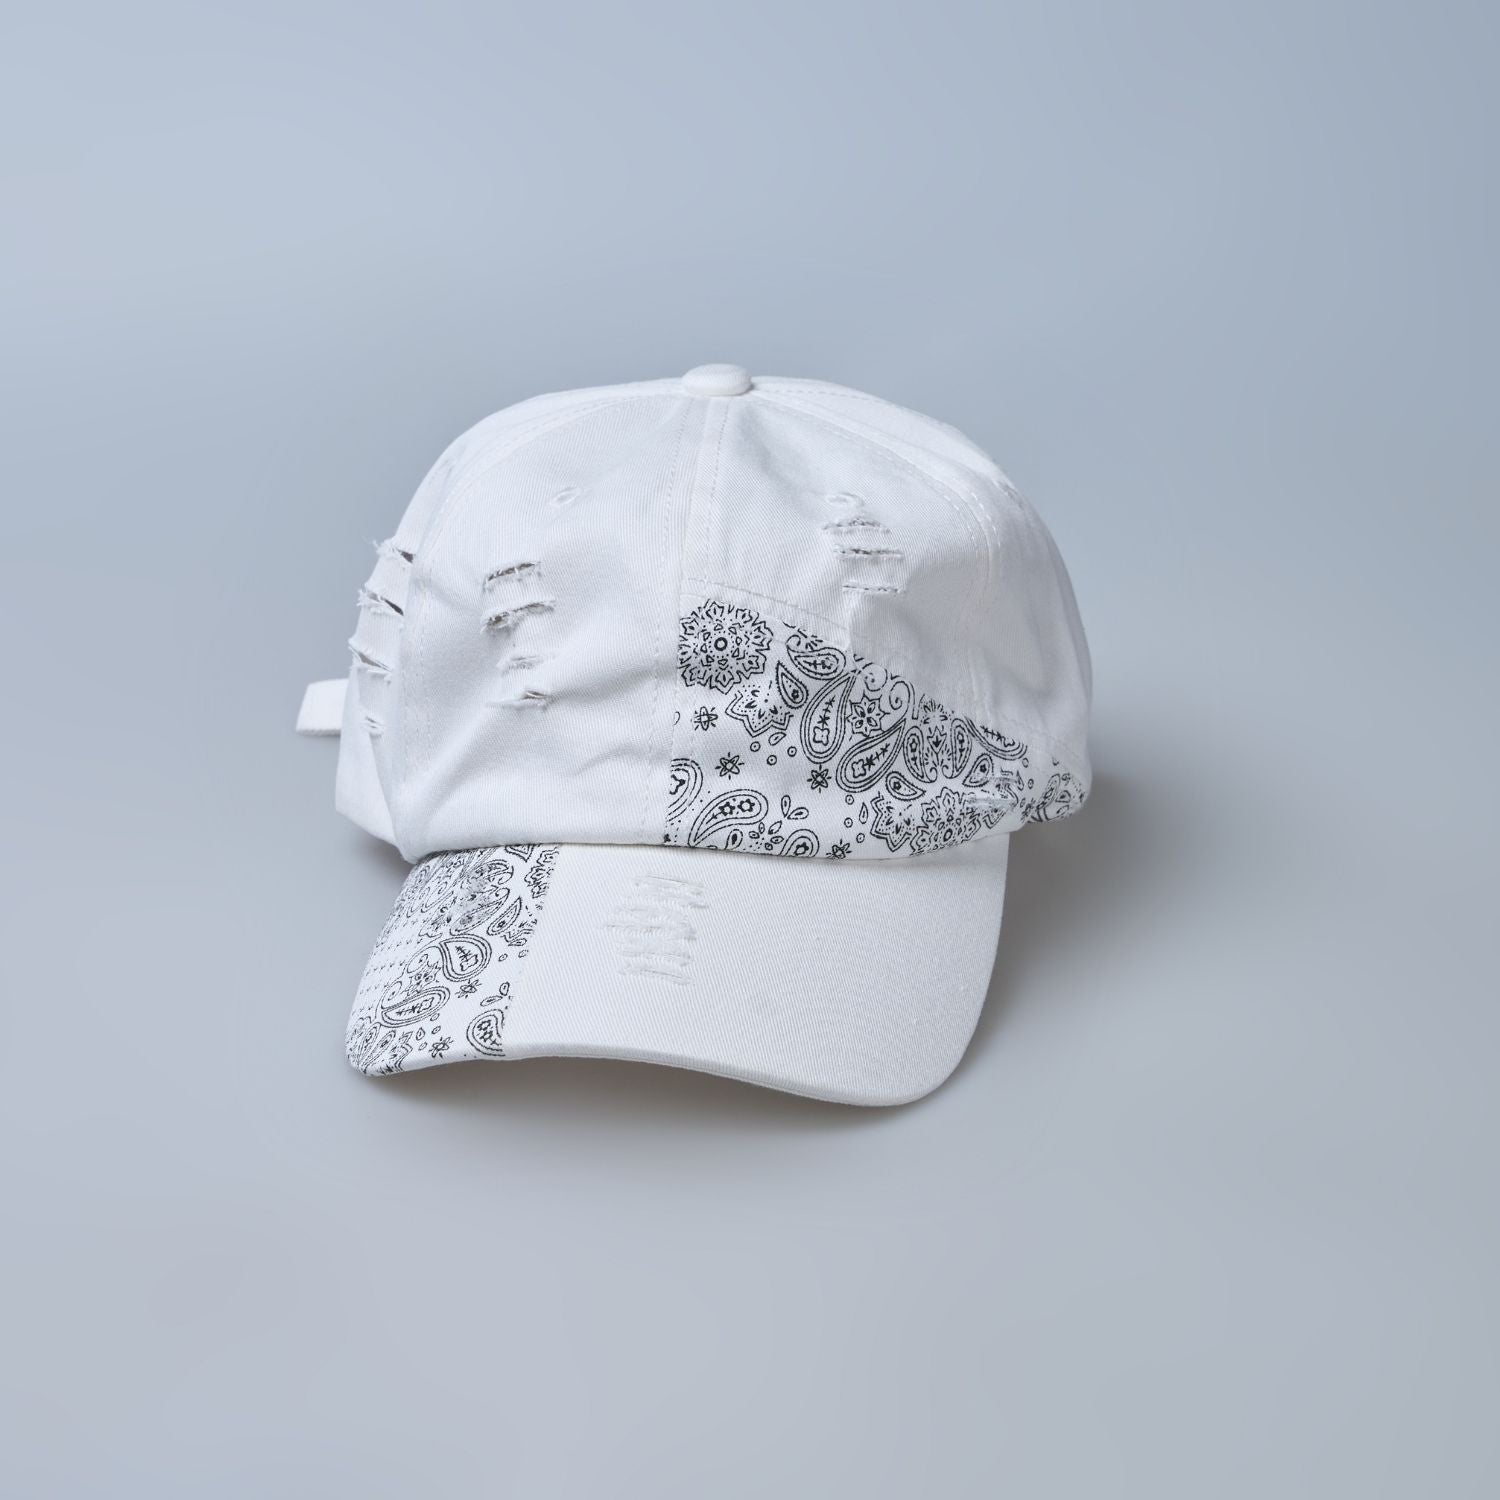 white colored, wide brim designer cap for men with adjustable strap, front view.